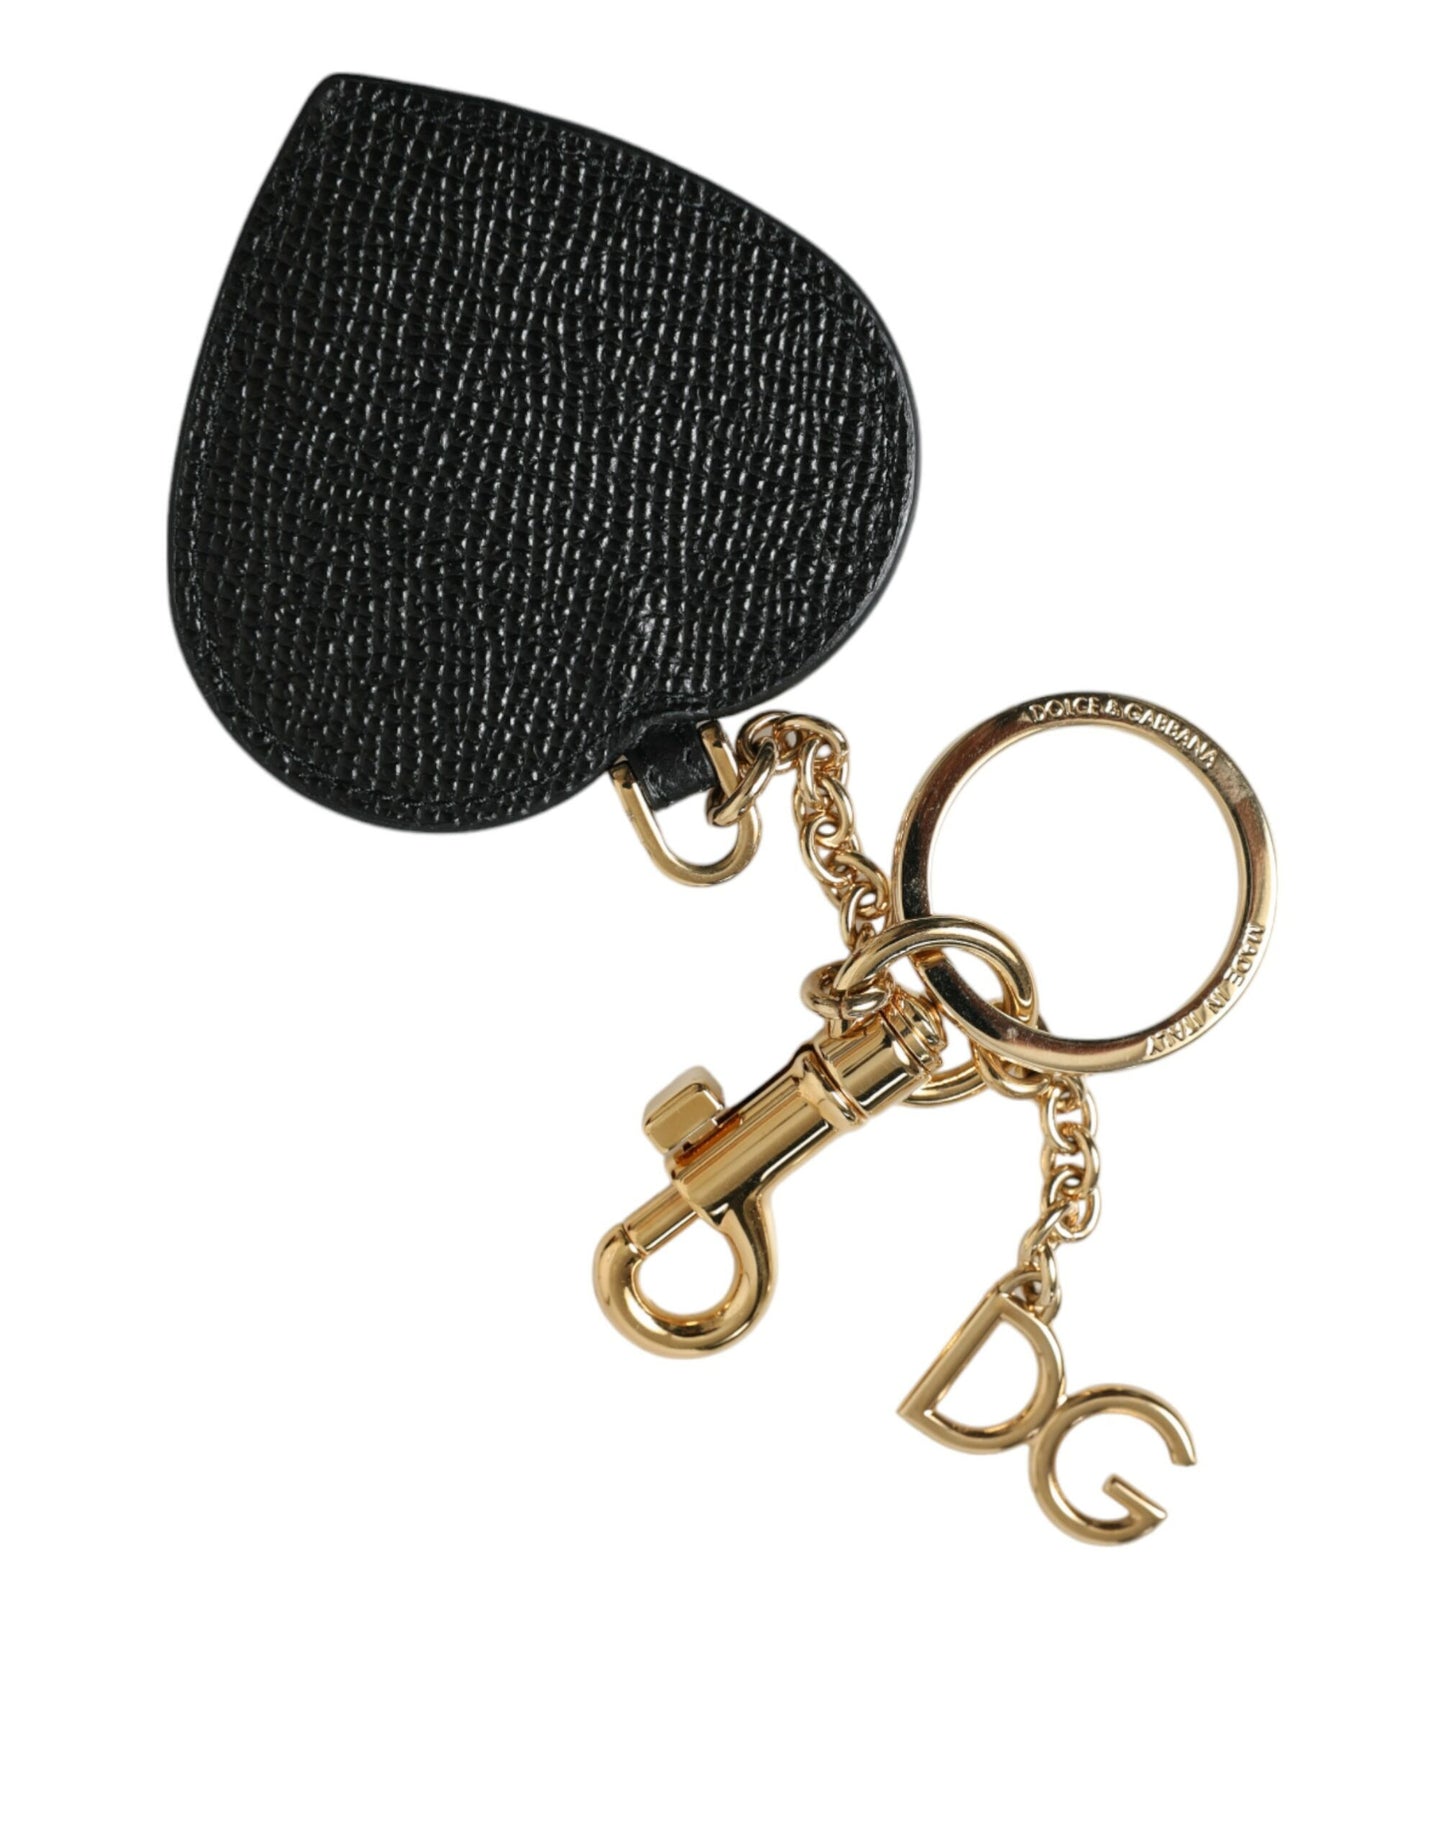 Dolce & Gabbana Stunning Gold and Pink Leather Keychain